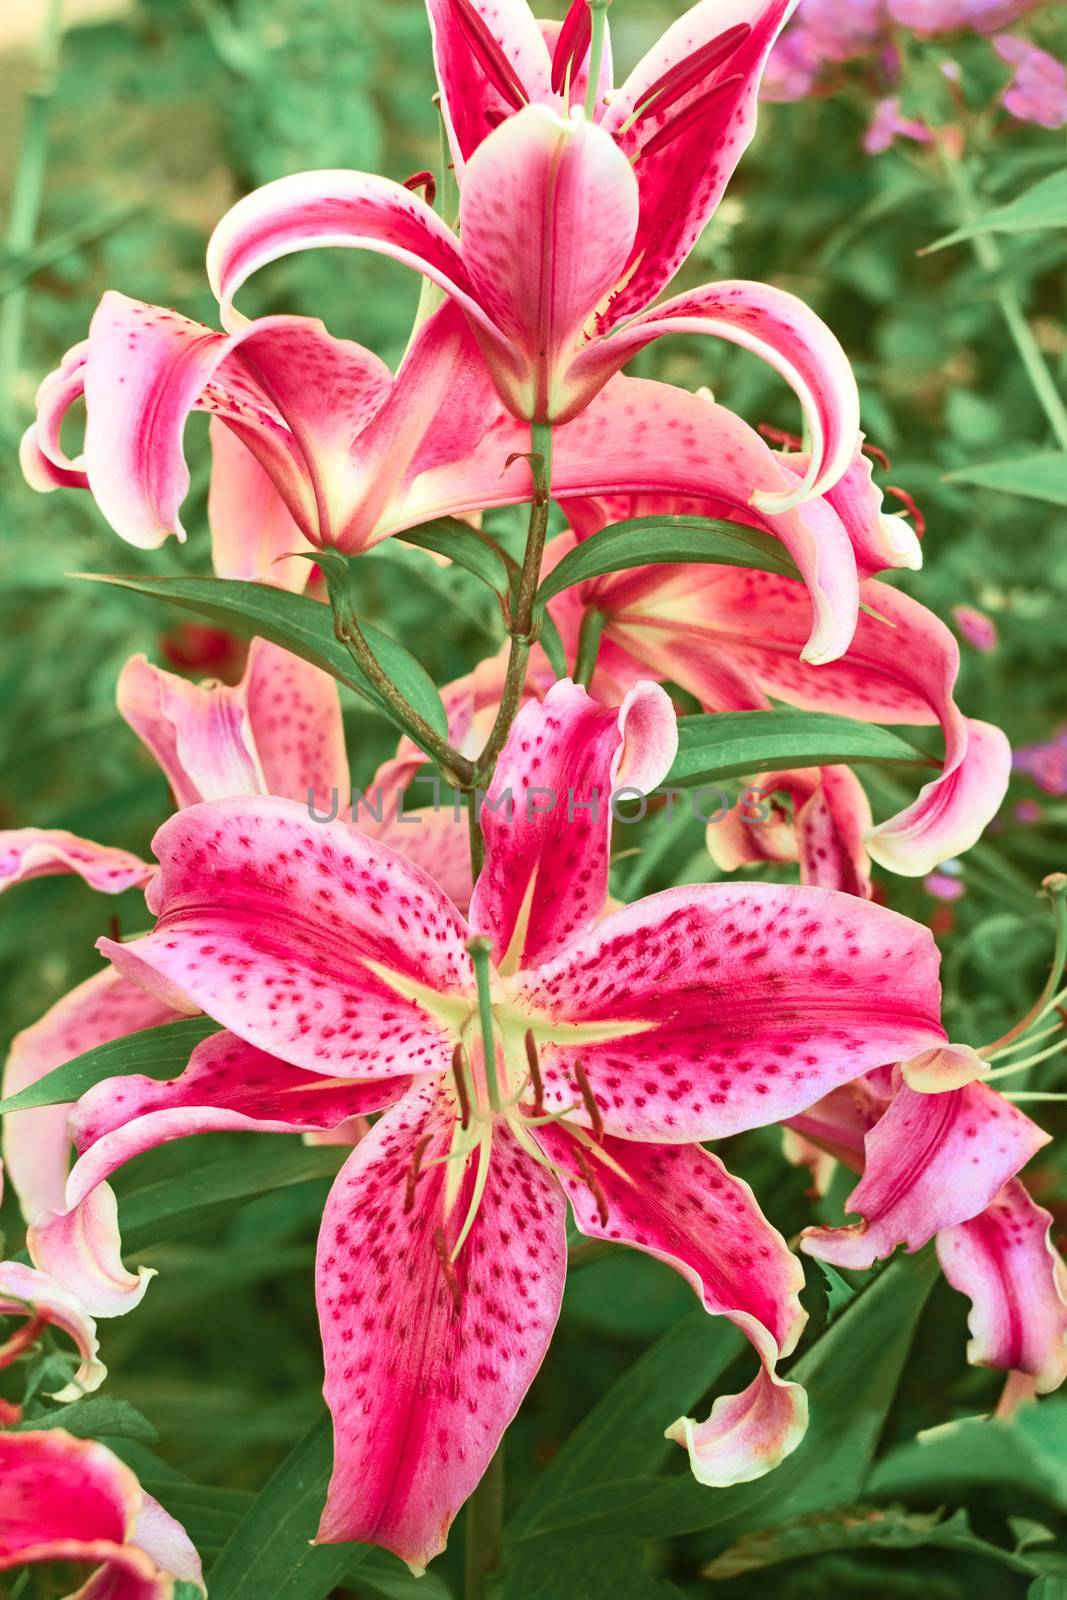 Large pink decorative lily flowers blooming on the flower bed